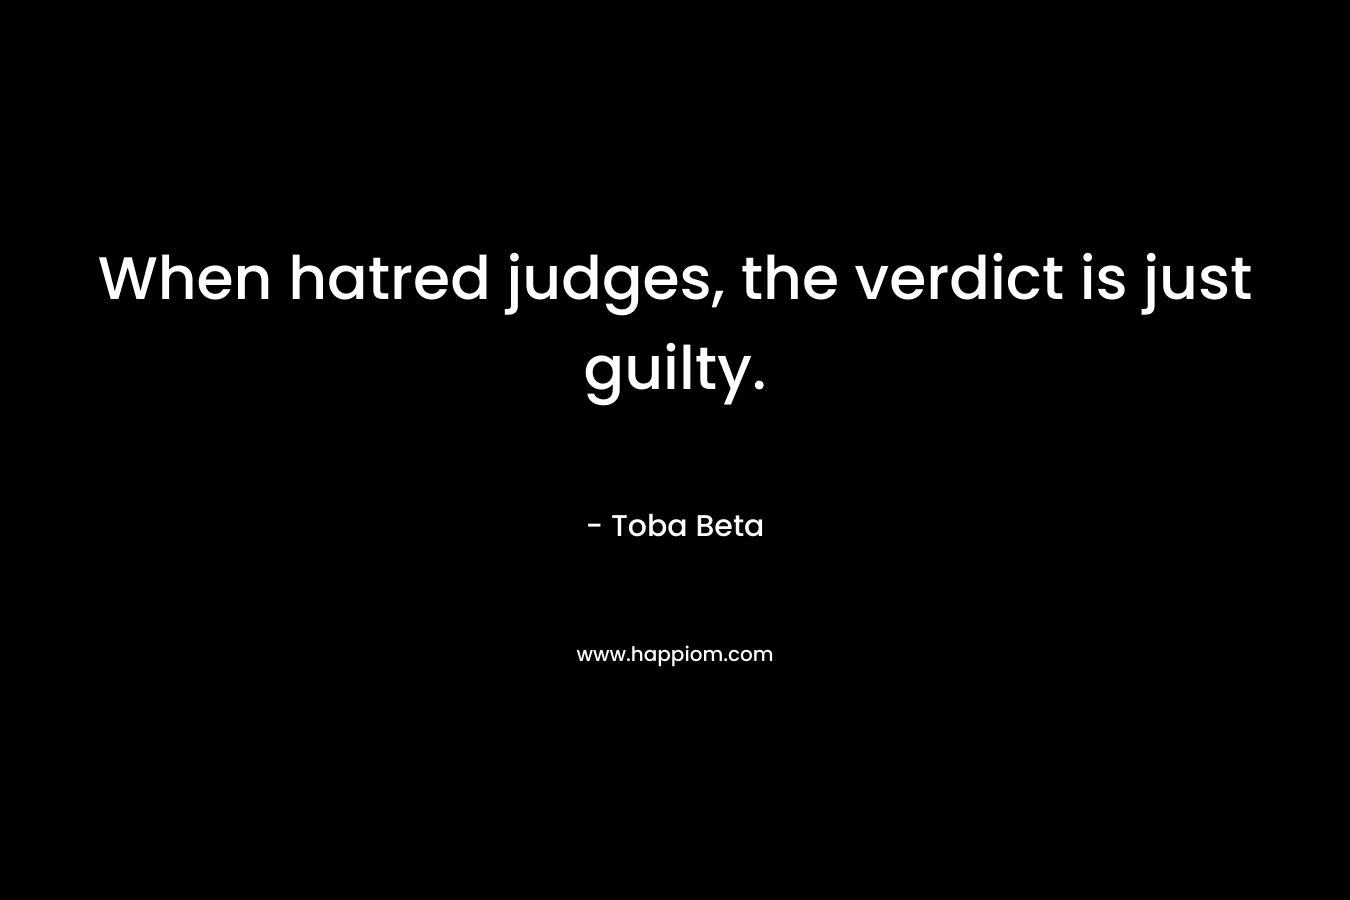 When hatred judges, the verdict is just guilty. – Toba Beta